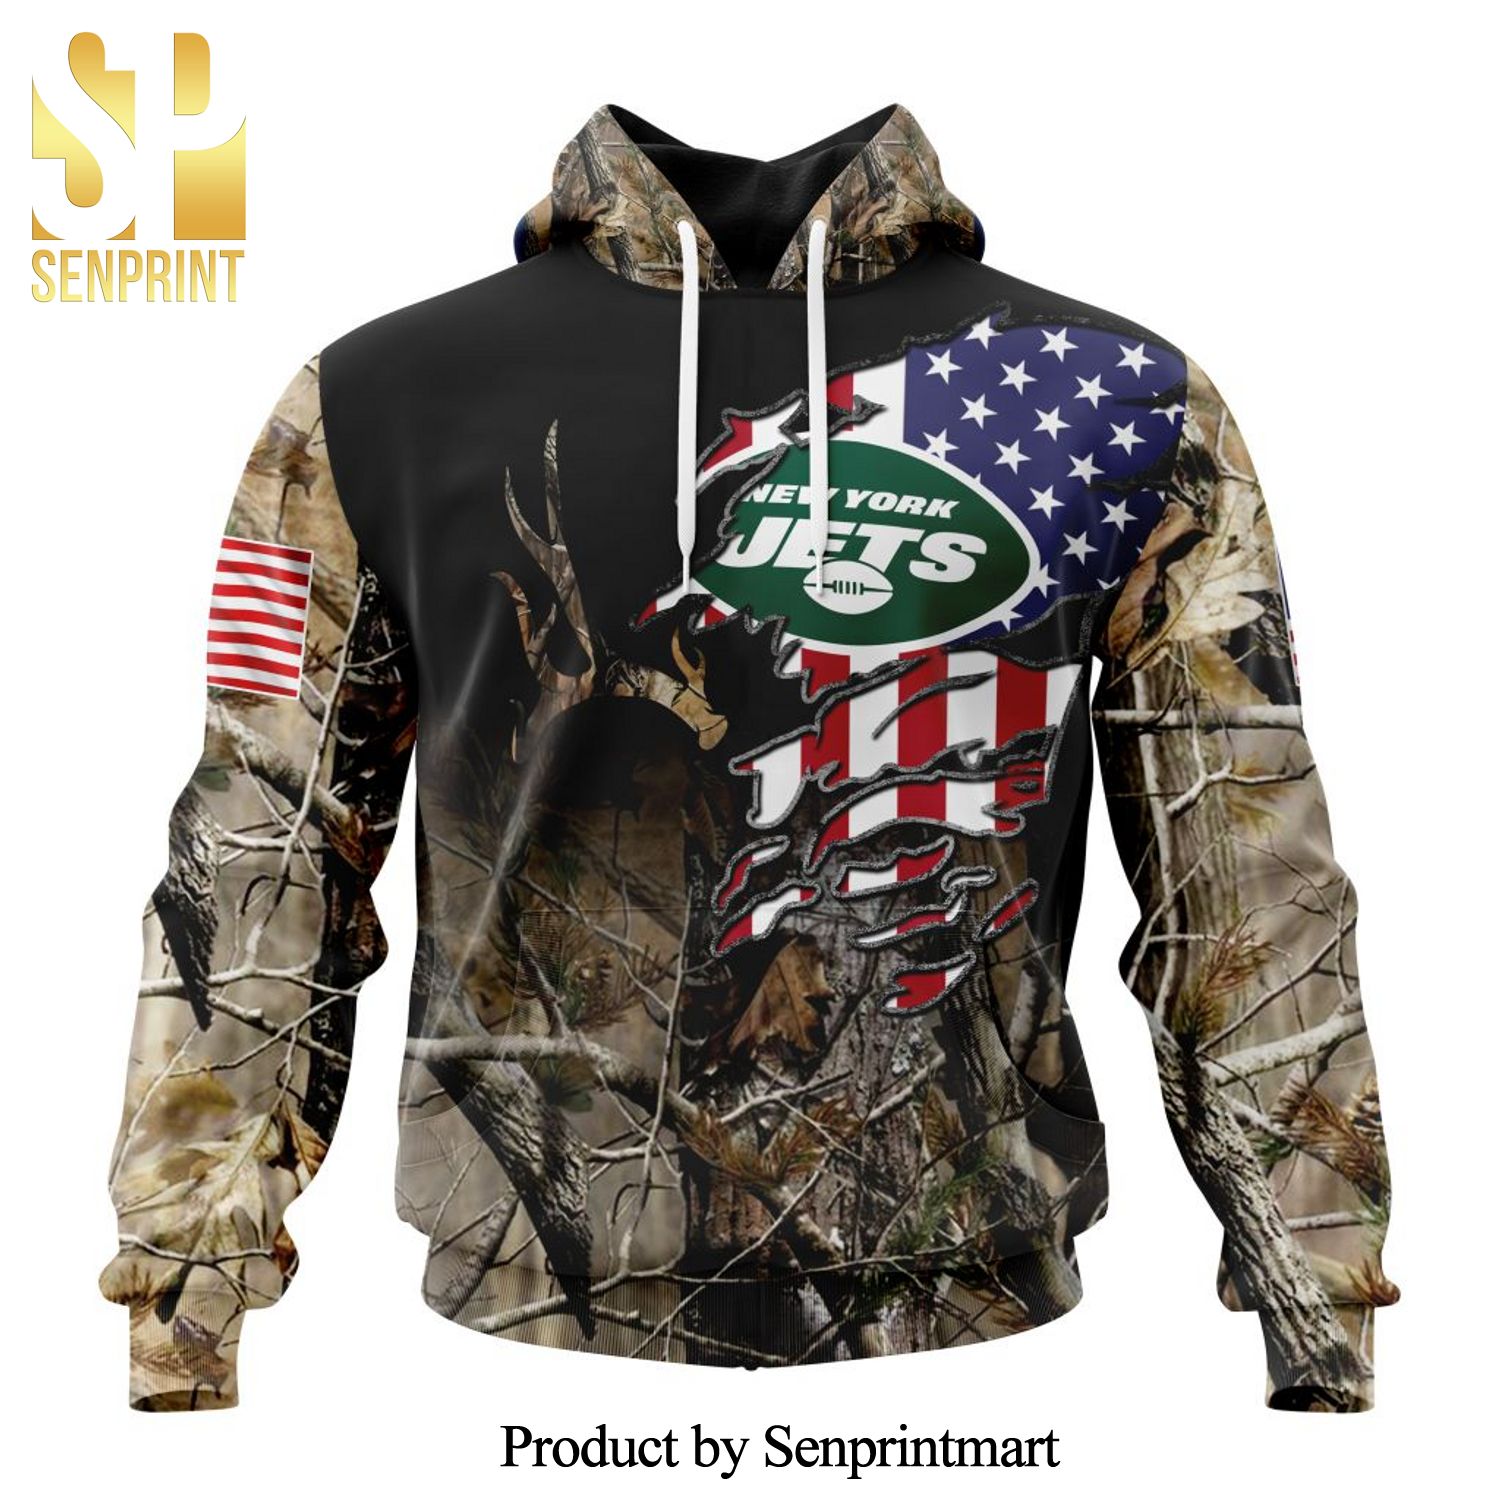 NFL New York Jets Version Camo Realtree Hunting All Over Printed Shirt